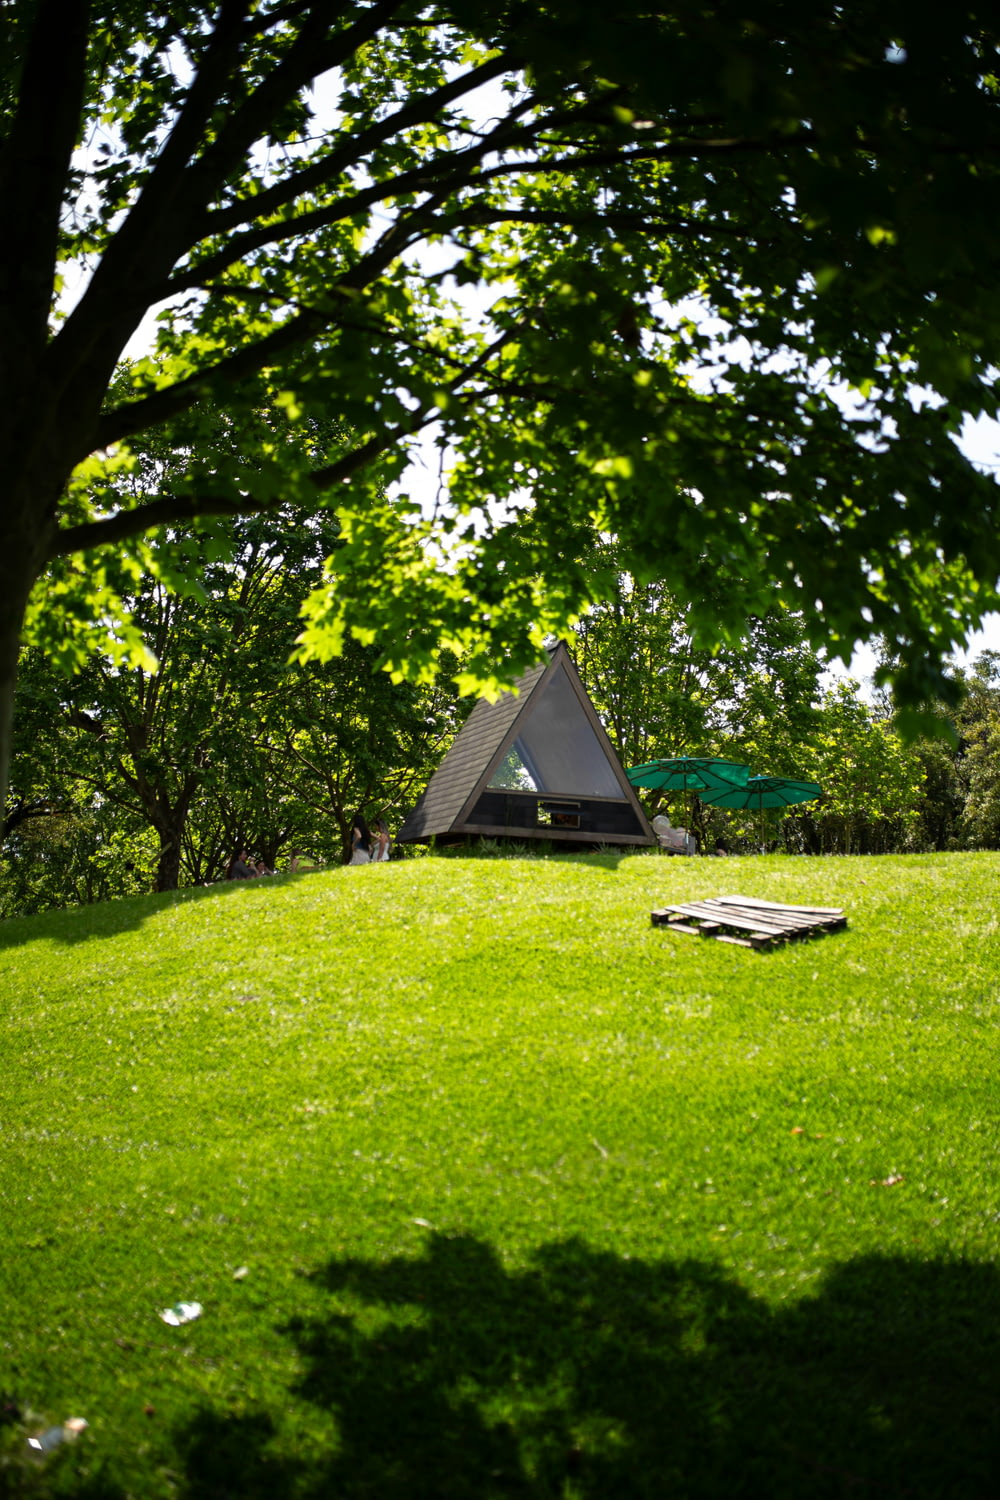 a tent in the middle of a grassy field